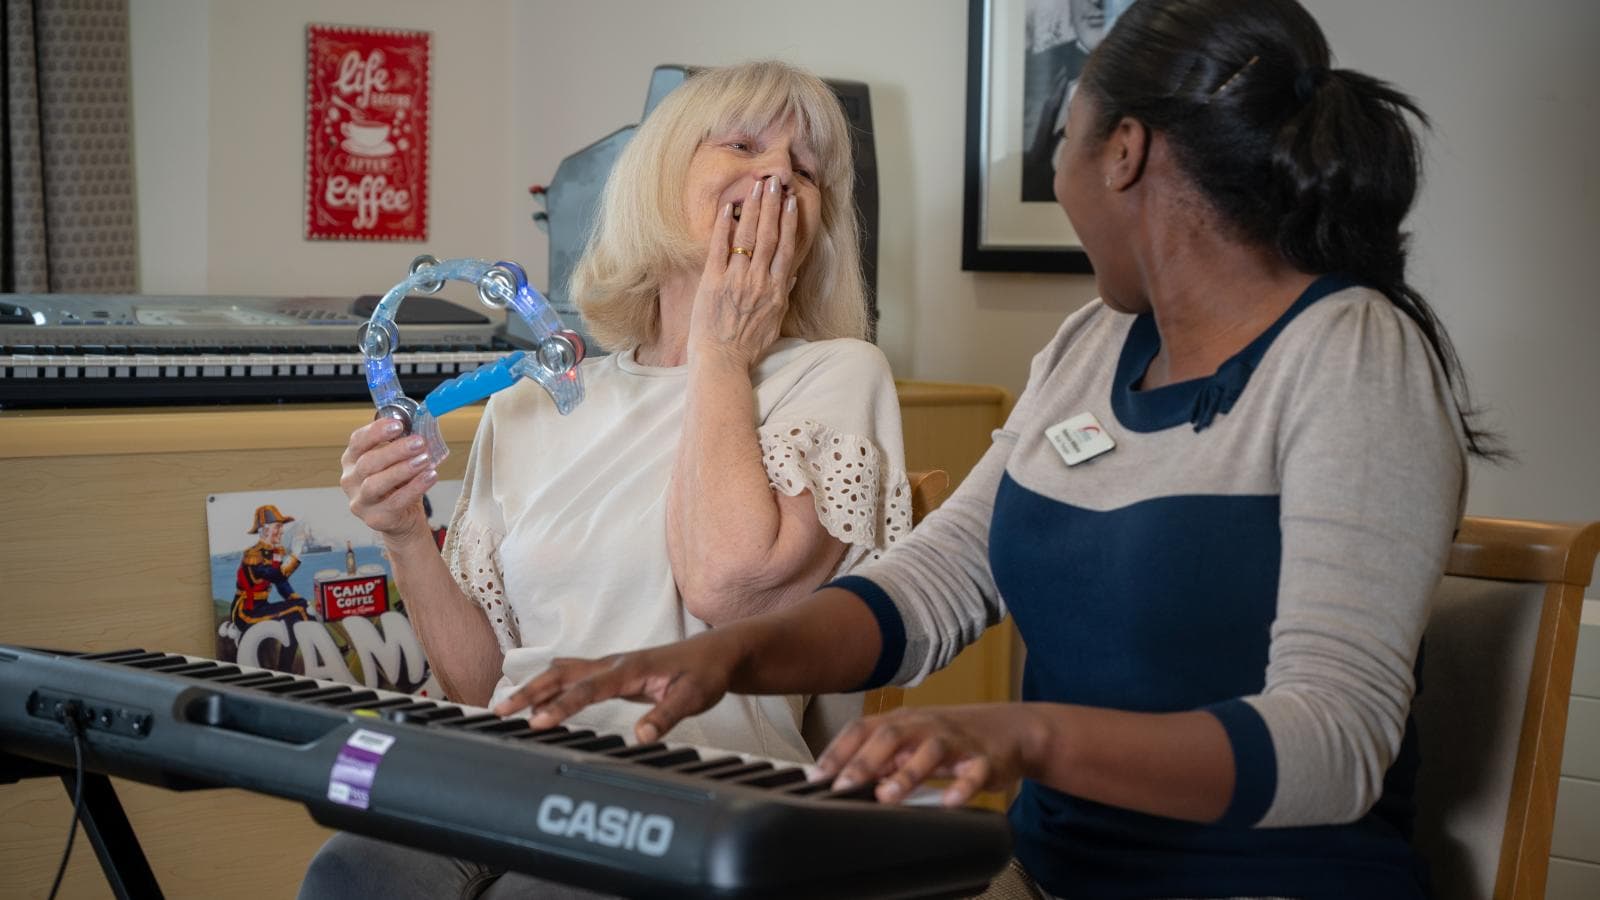 Music therapist plays piano and female residents laughs covering her mouth